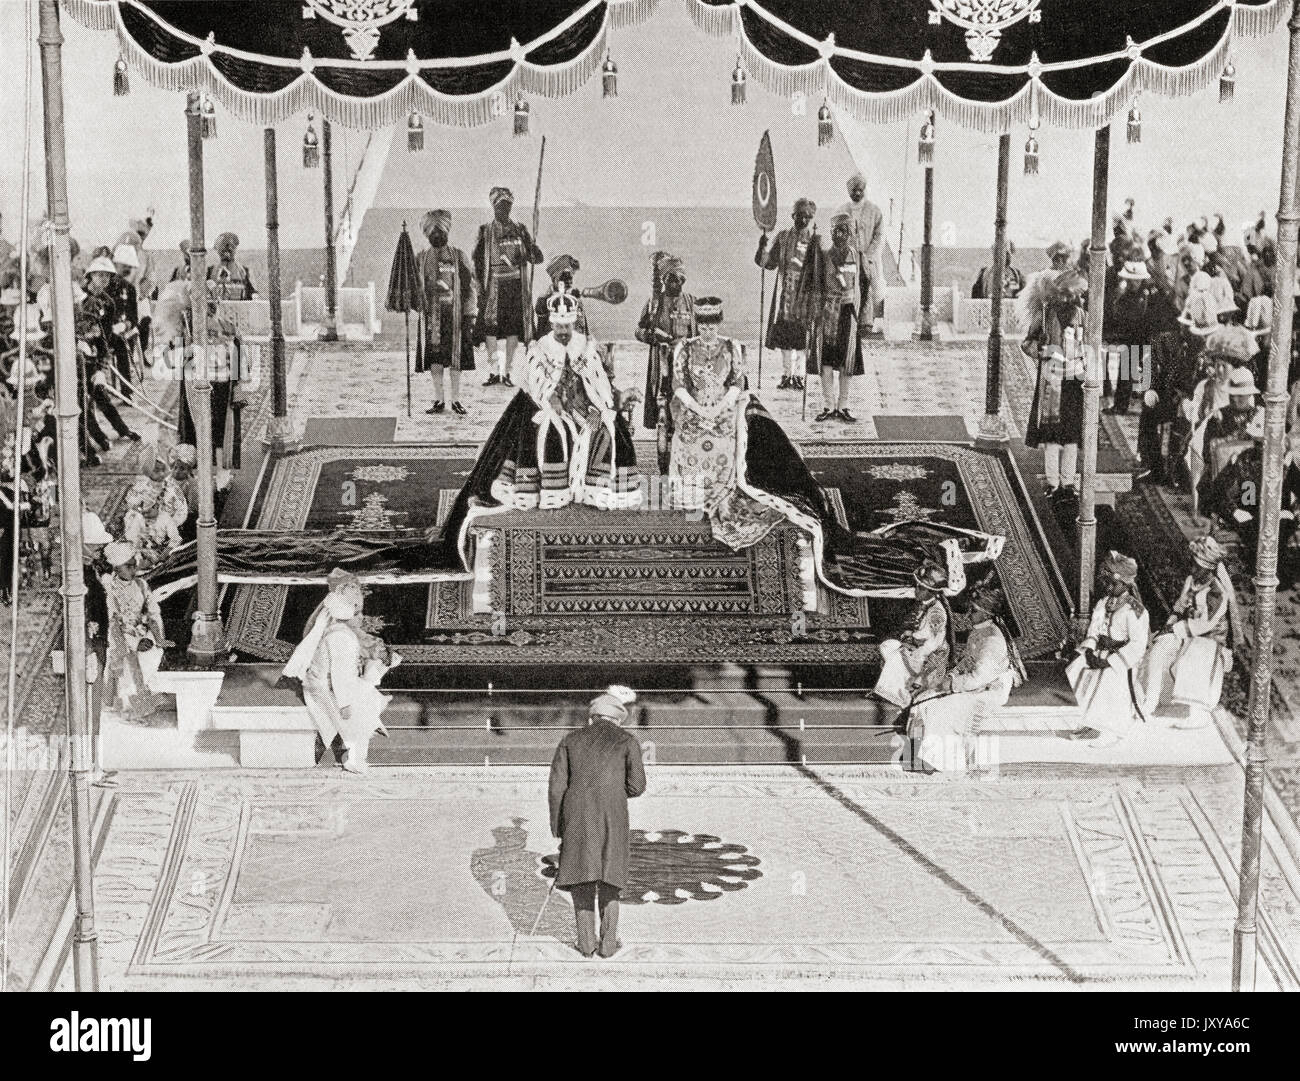 The Nizam of Haidarabad pays homage to King George V and Queen Mary at the 1911 Delhi Durbar, Coronation Park, India. George V, 1865 – 1936.  King of the United Kingdom and the British Dominions, and Emperor of India. Mary of Teck, 1867 – 1953. Queen of the United Kingdom and the British Dominions and Empress of India. From Hutchinson's History of the Nations, published 1915. Stock Photo